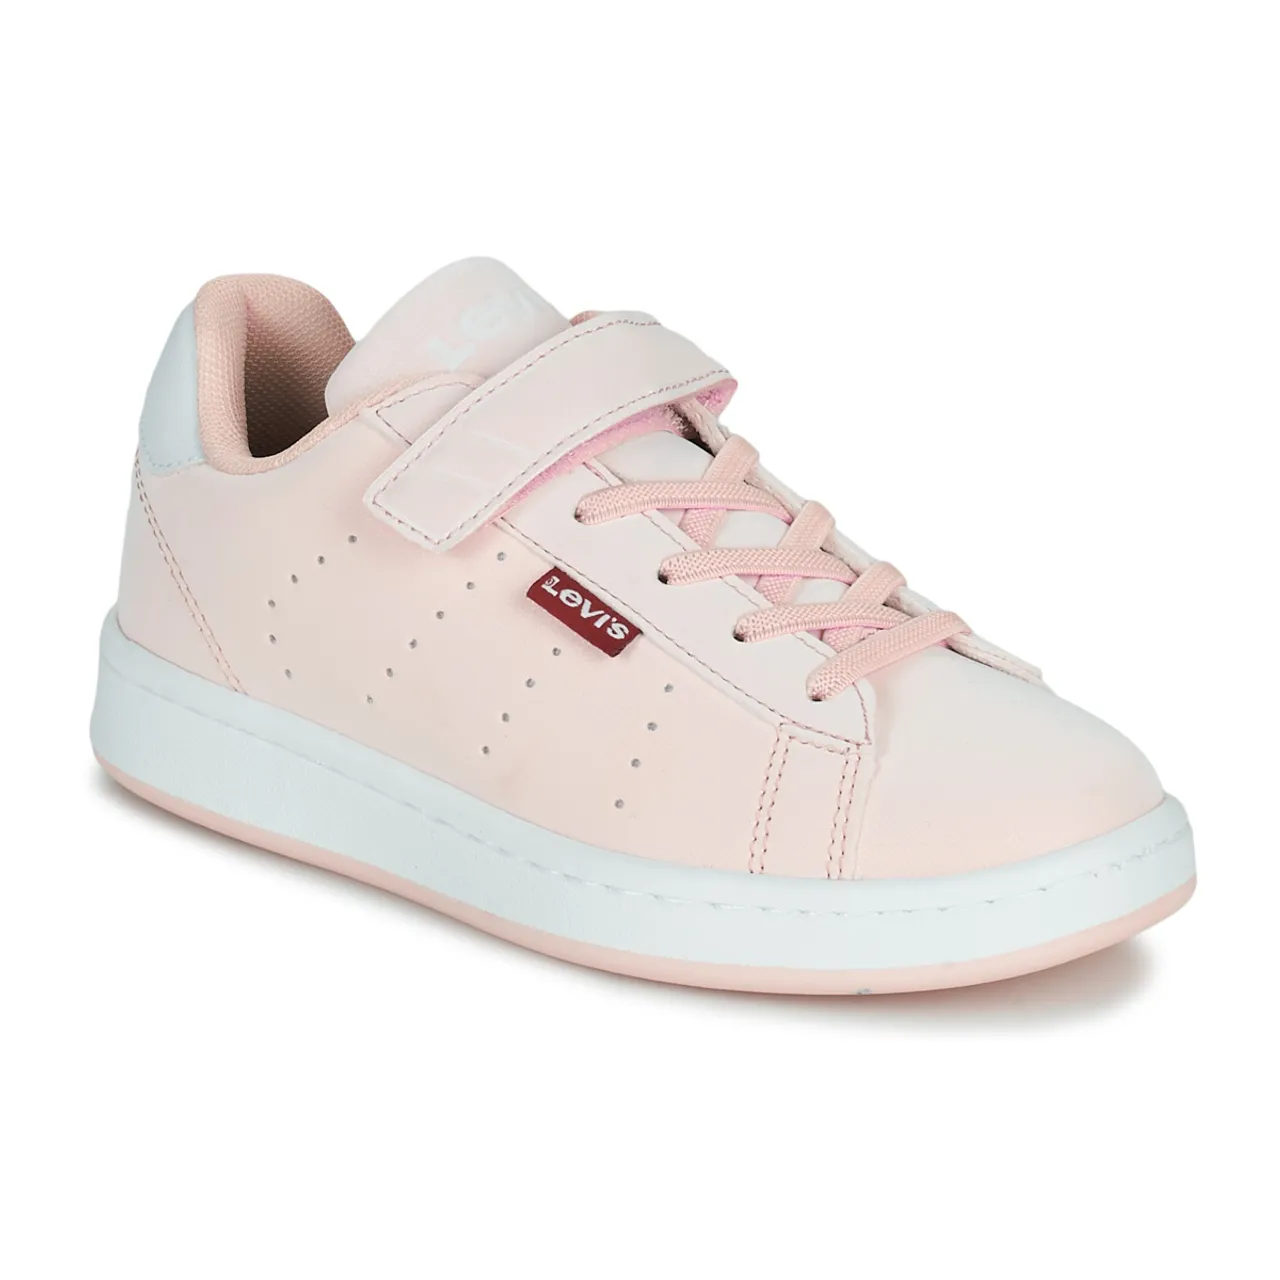 Levis  LINCOLN  women's Shoes (Trainers) in Pink